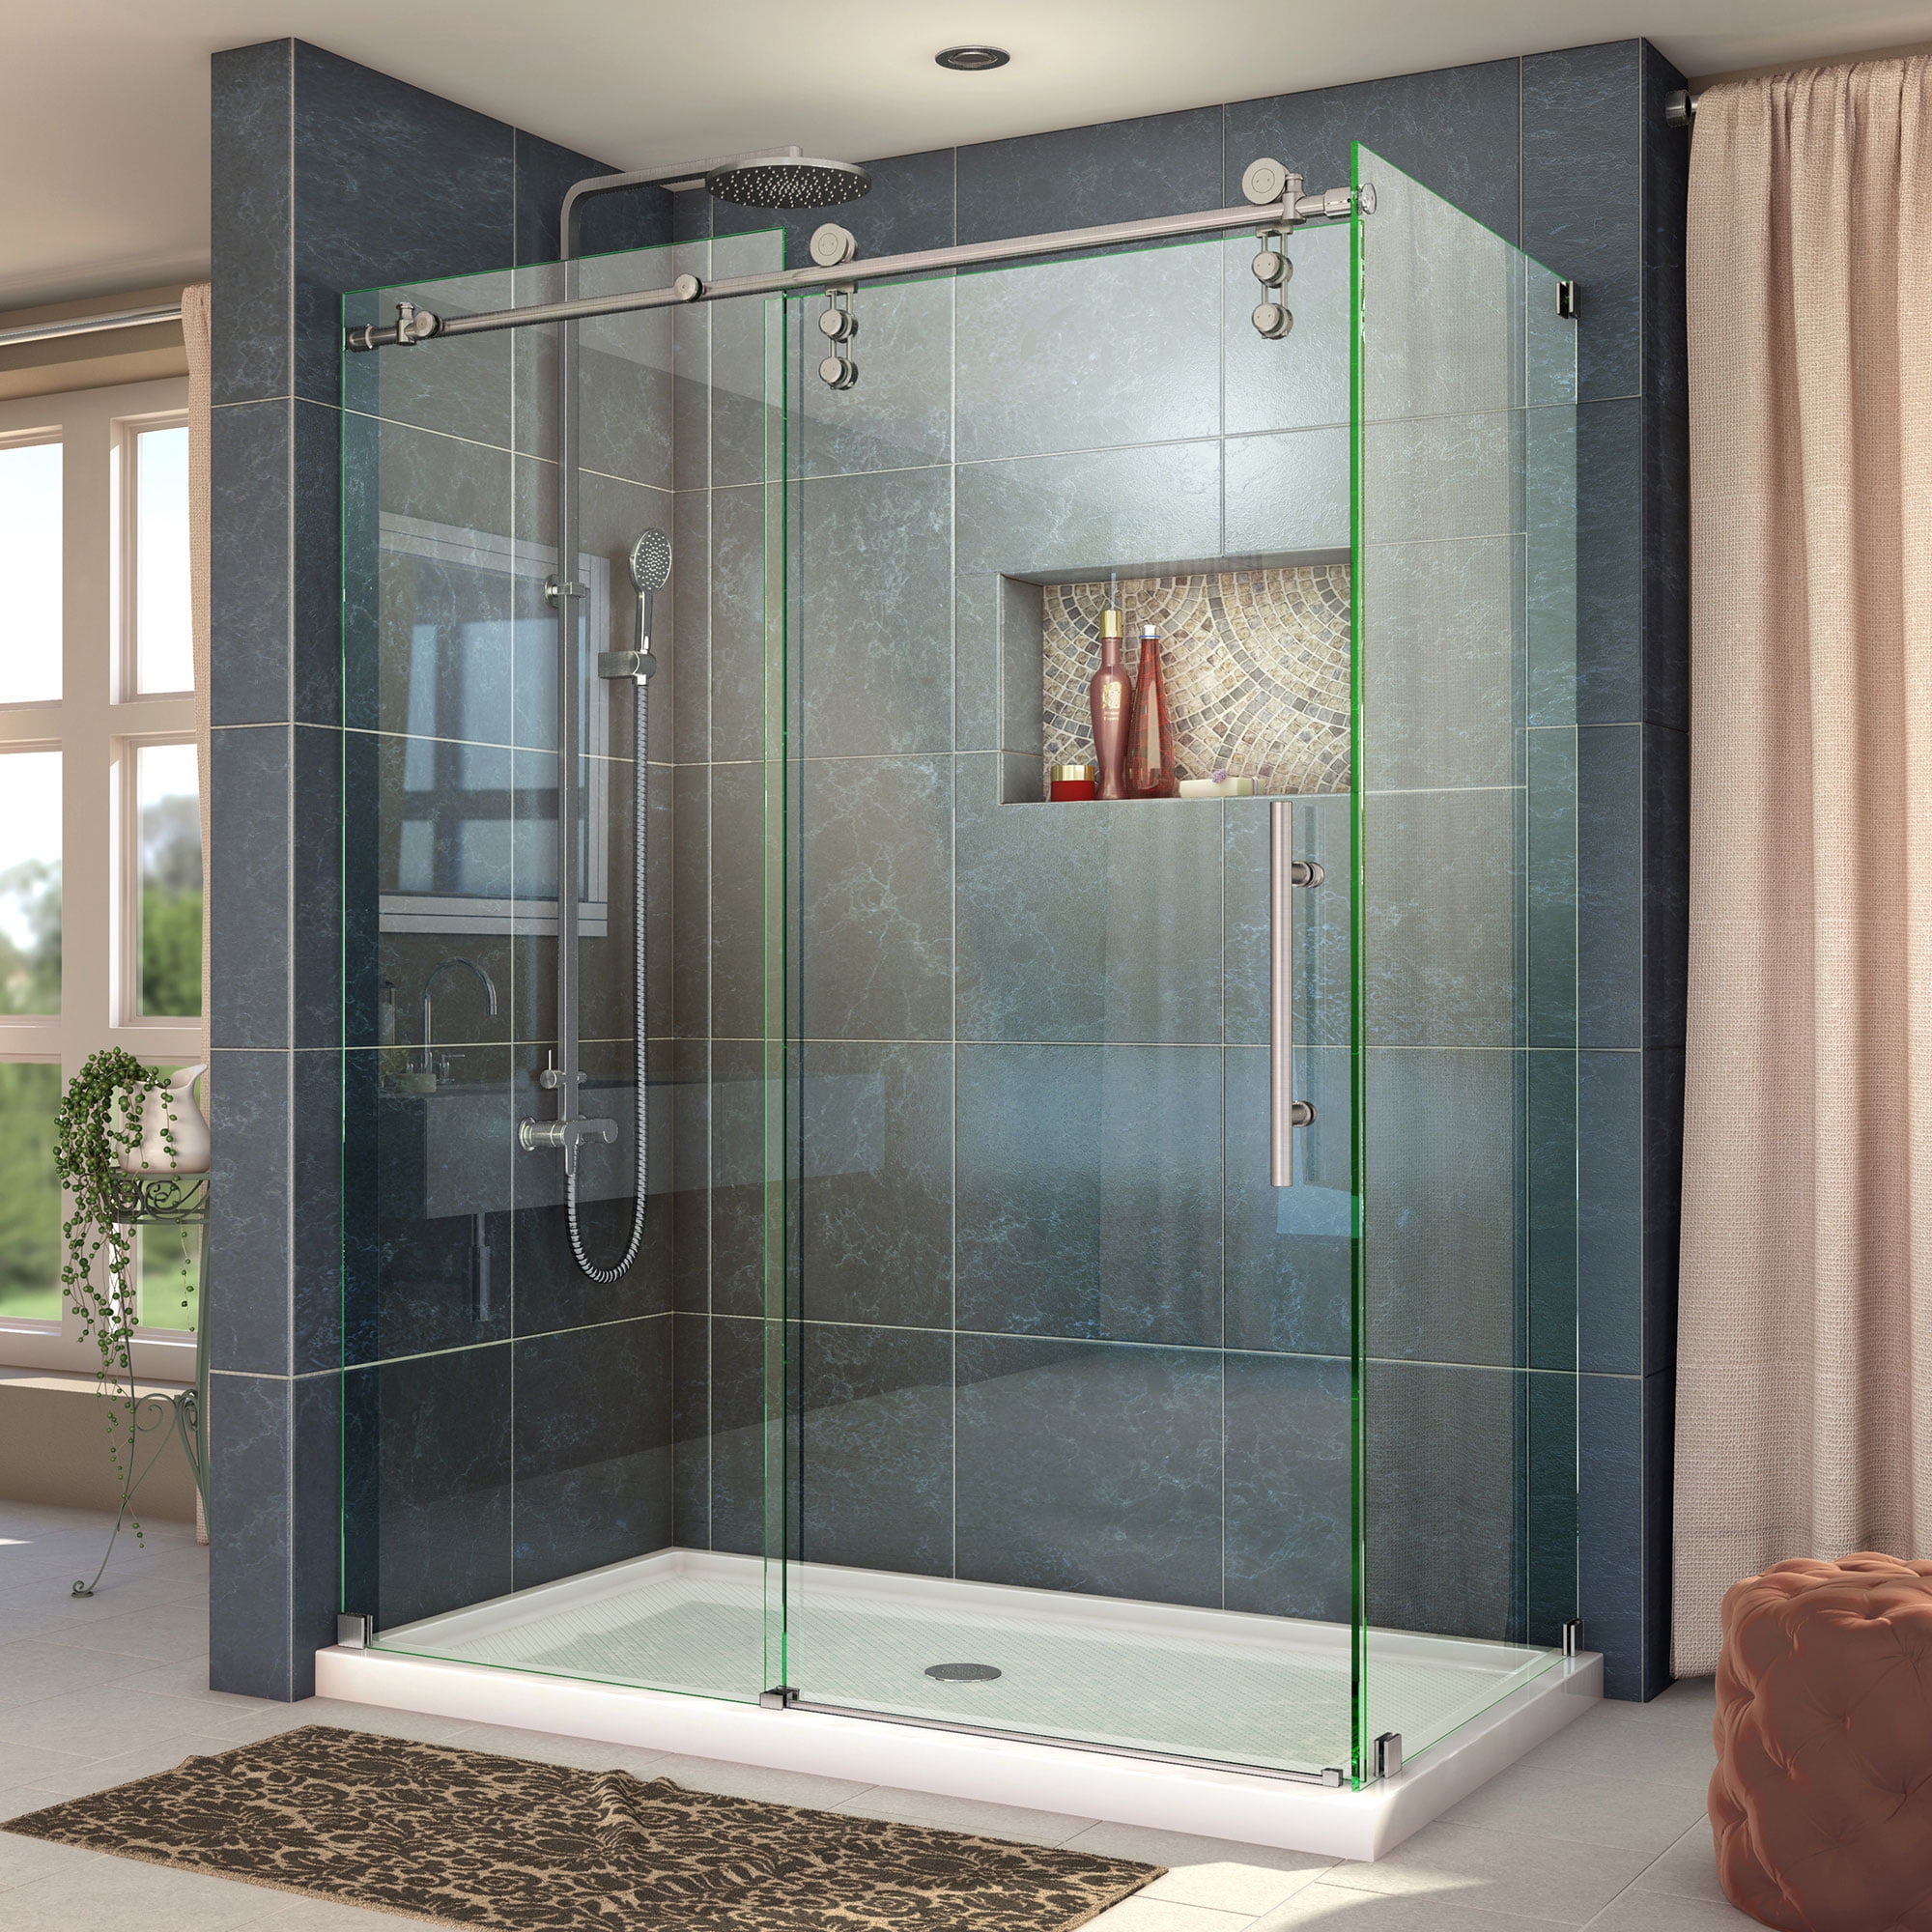 Enigma-Z 34-1/2" x 48-3/8" Fully Frameless Sliding Shower Enclosure, Clear 3/8" Glass, Brushed Stainless Steel